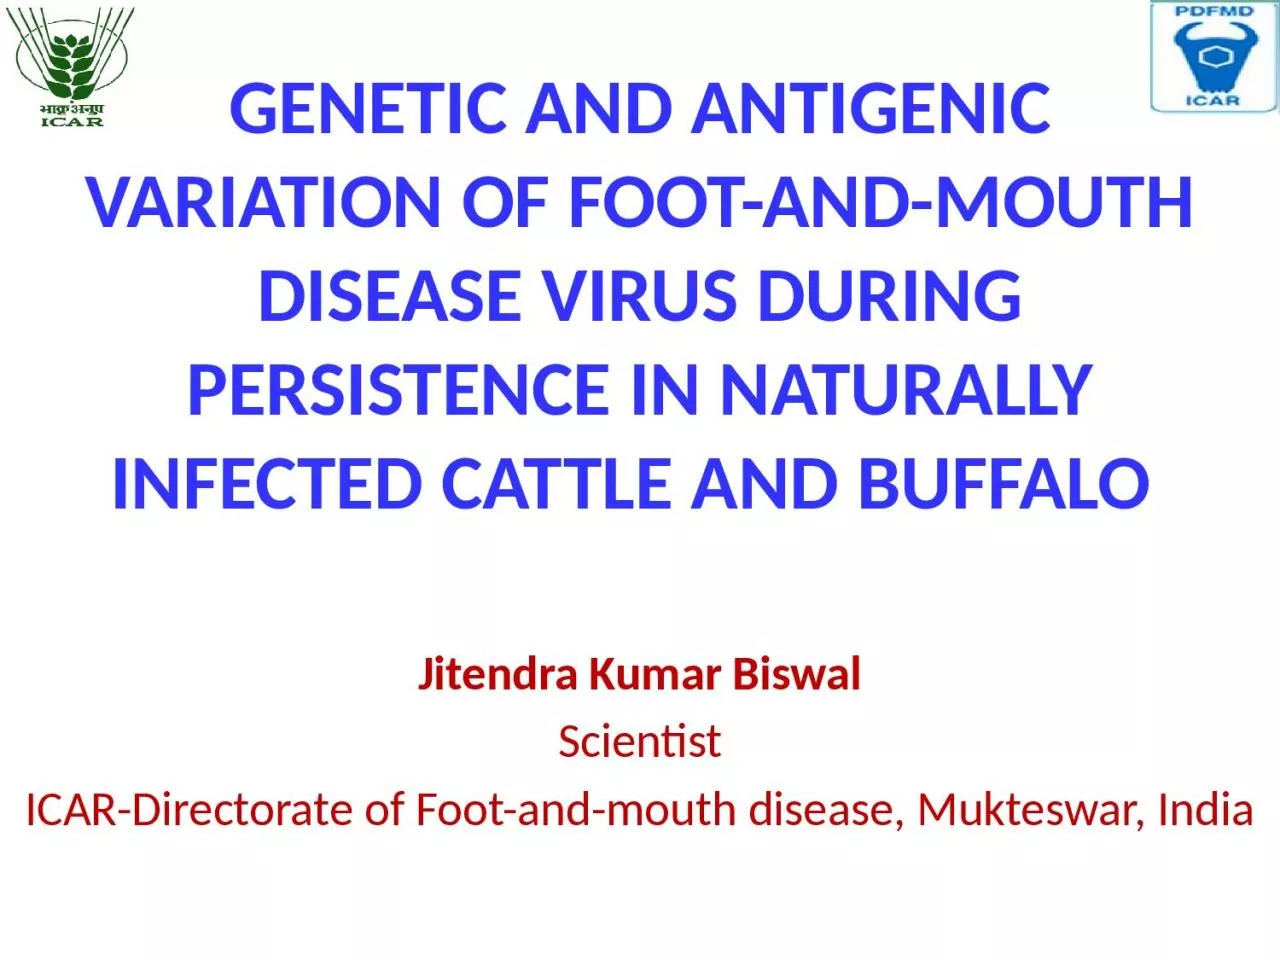 GENETIC AND ANTIGENIC VARIATION OF FOOT-AND-MOUTH DISEASE VIRUS DURING PERSISTENCE IN